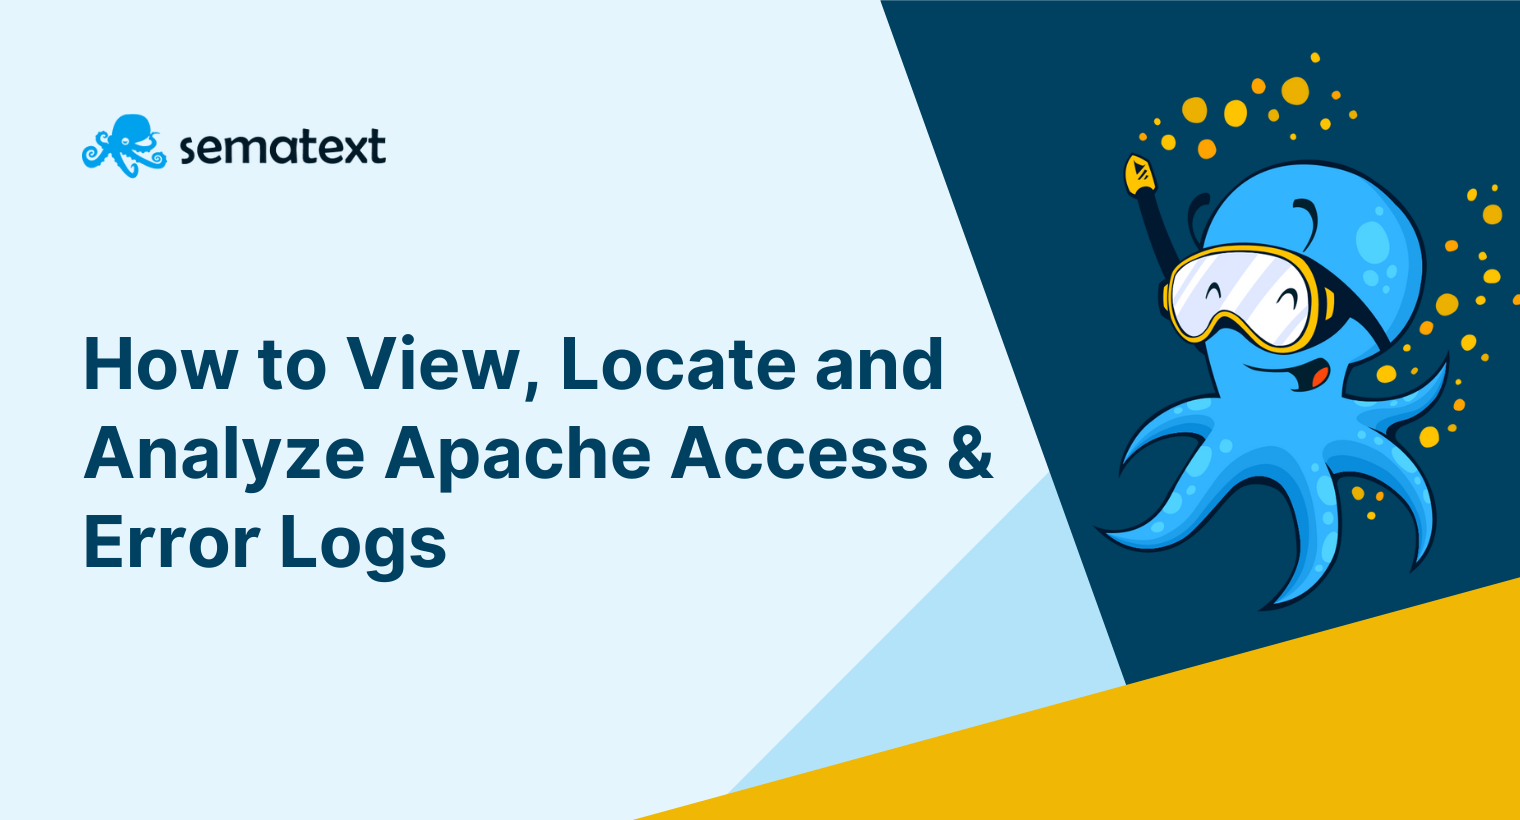 Understanding Apache Logging: How to View, Locate and Analyze Access & Error Logs